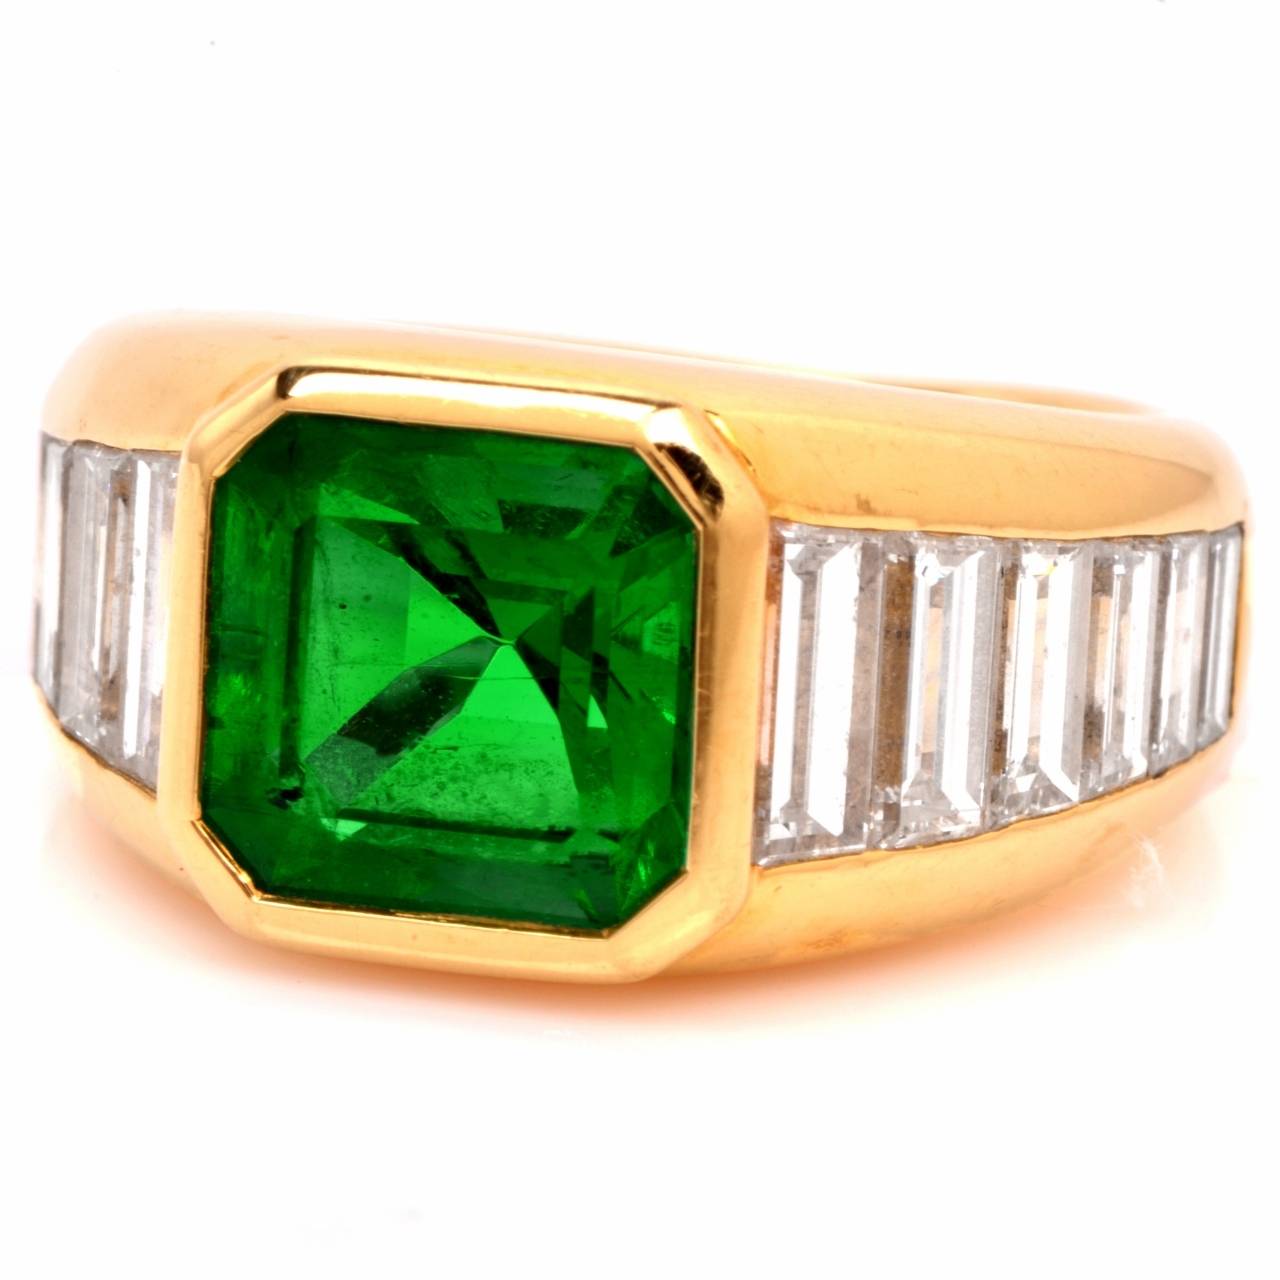 Dover Jewelry presents this Tiffany & Co. ring with GIA certificate (GIA Report # 2175130238) crafted in solid 18K yellow gold.

The Colombian emerald of transparent intense green color extremely high quality measures 8.24 x 8.15 x 5.87 mm,